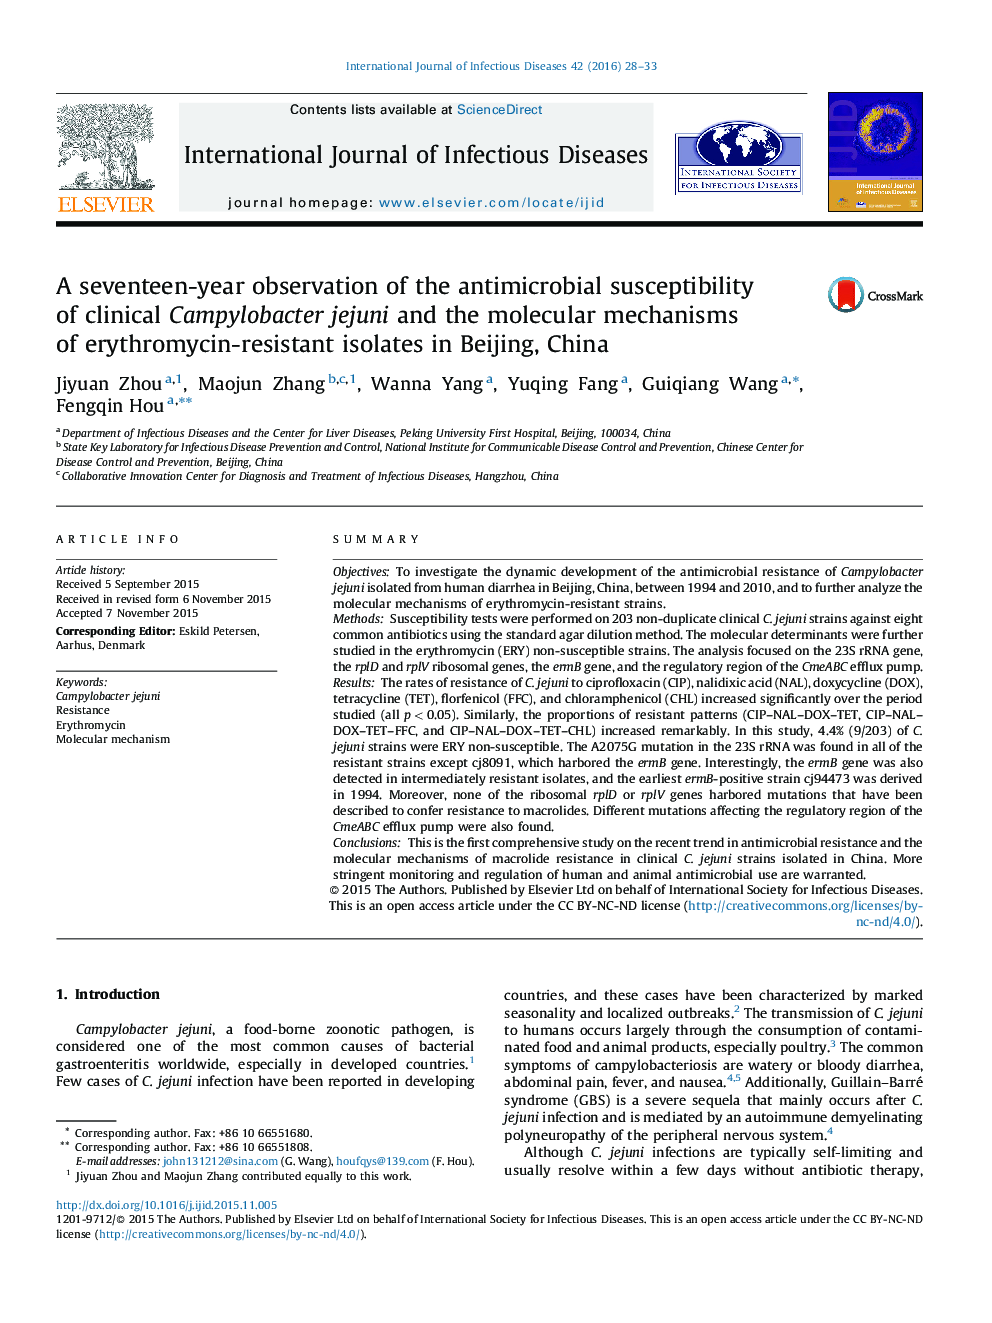 A seventeen-year observation of the antimicrobial susceptibility of clinical Campylobacter jejuni and the molecular mechanisms of erythromycin-resistant isolates in Beijing, China